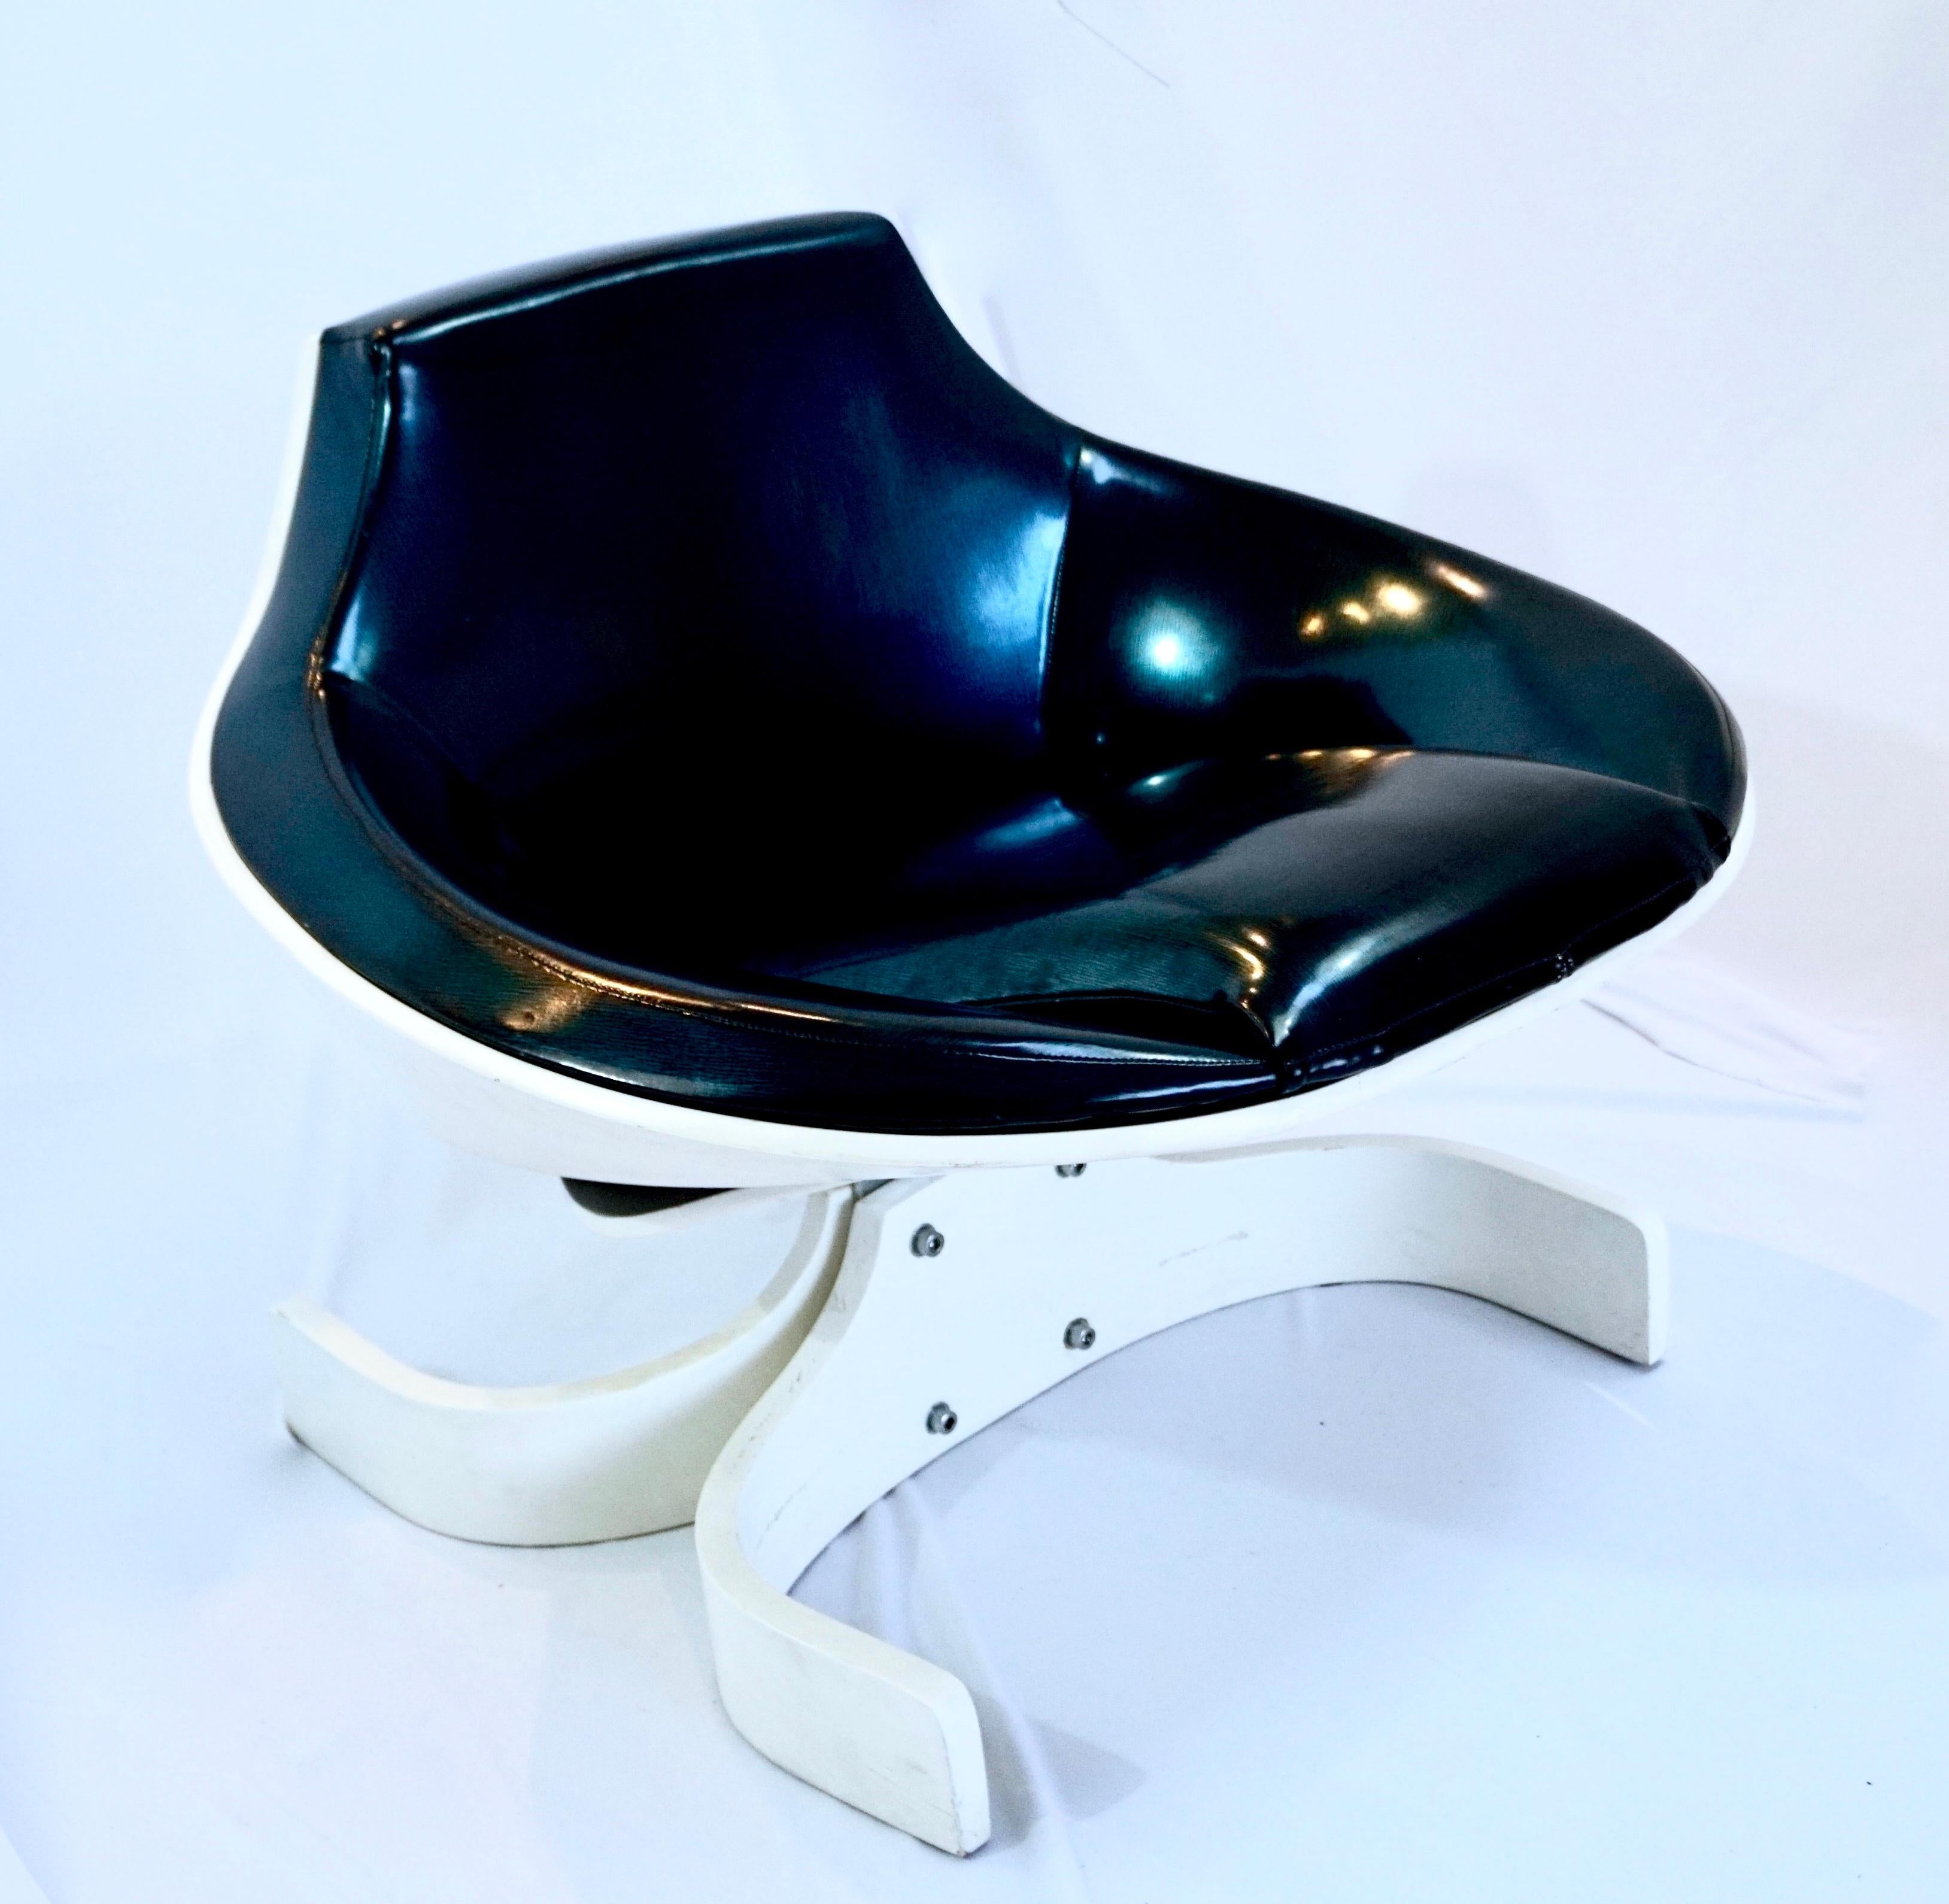 Sella 1001 - Designed by Joe Colombo, Italy, circa 1965 in Italy for Comfort Italy. Considered a collectors item, the Sella 1001 is one of the most innovative designs of the twentieth century. This iconic lounge chair is covered in iridescent